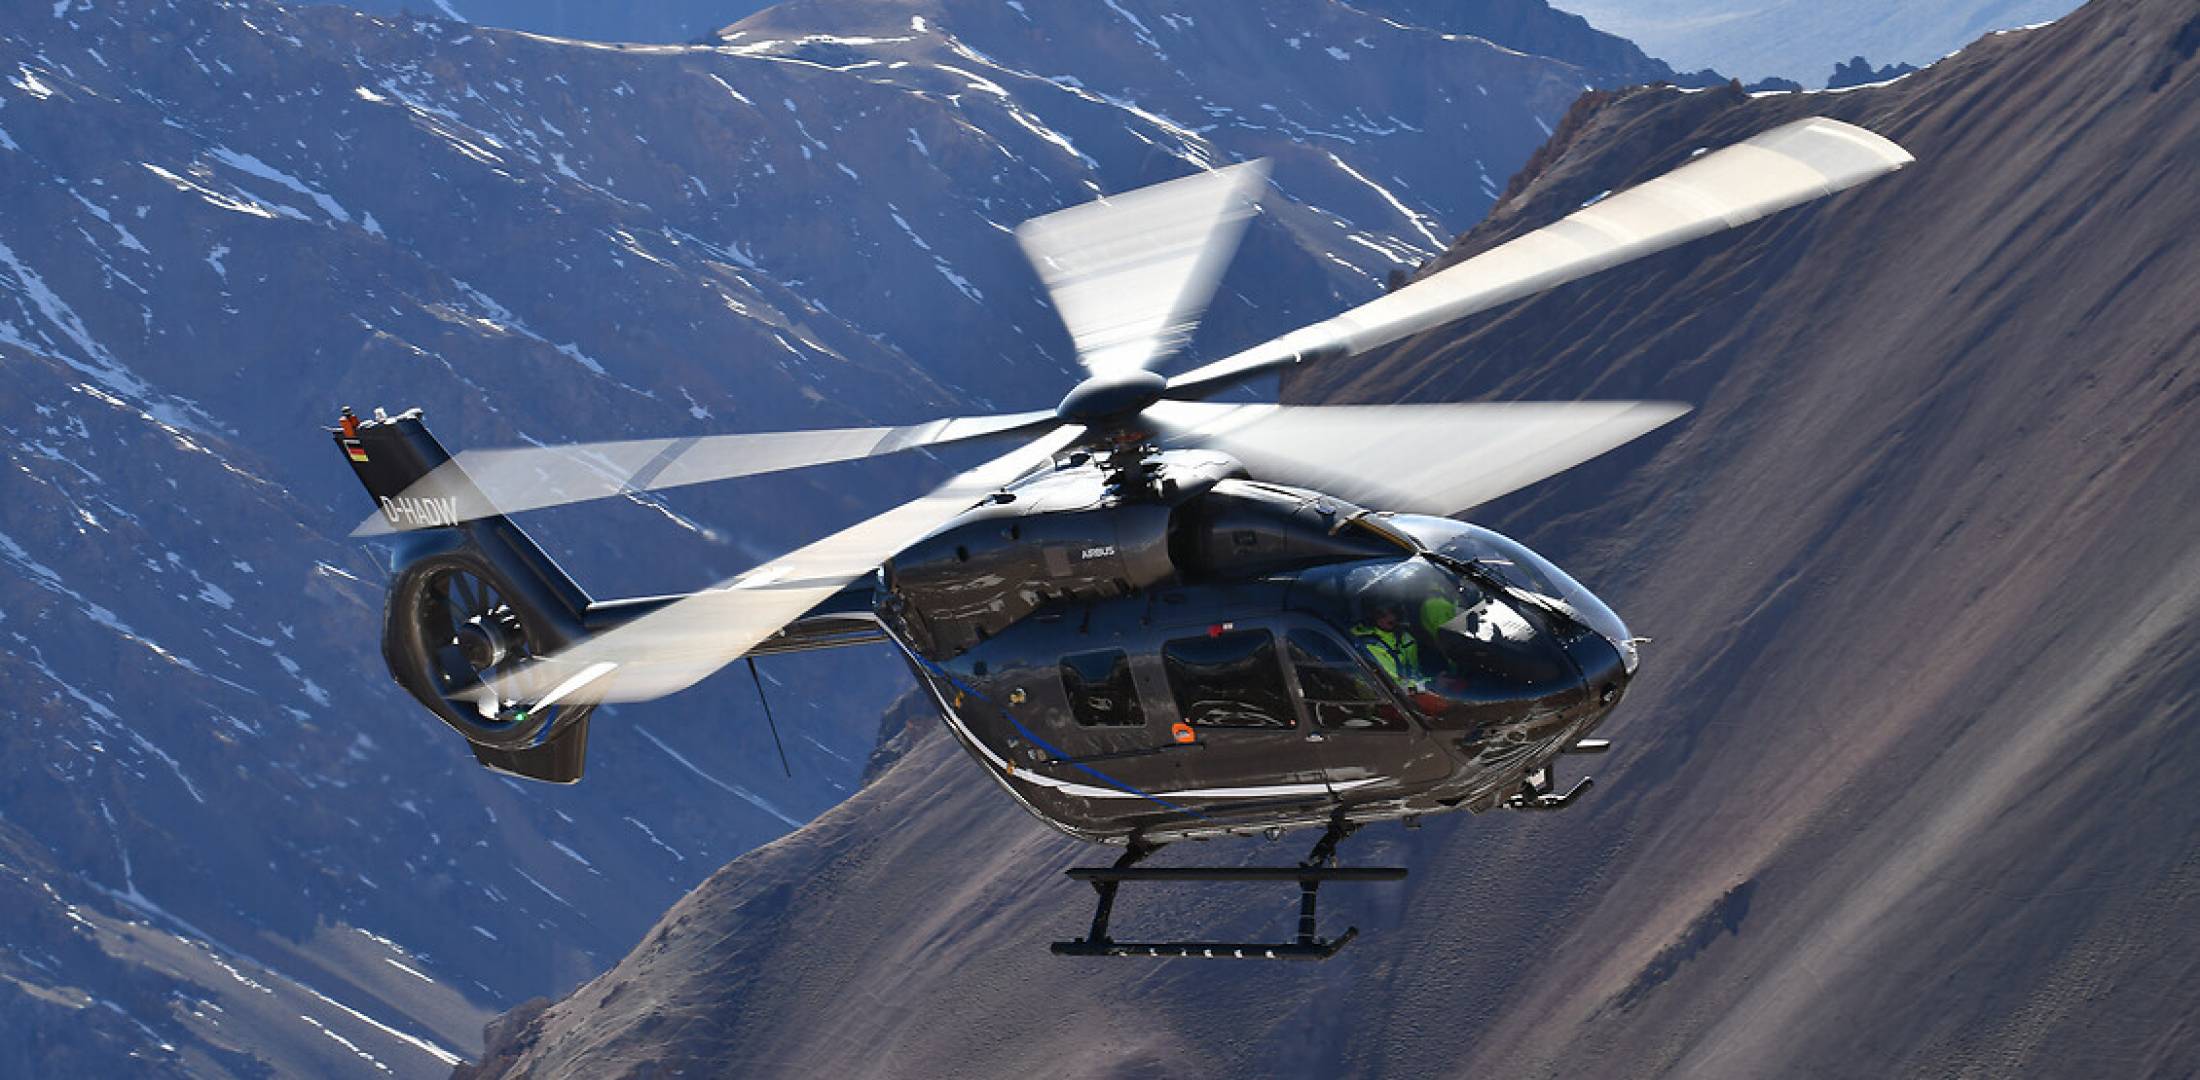 twin-engine H145 helicopter in flight over steep mountainous terrain